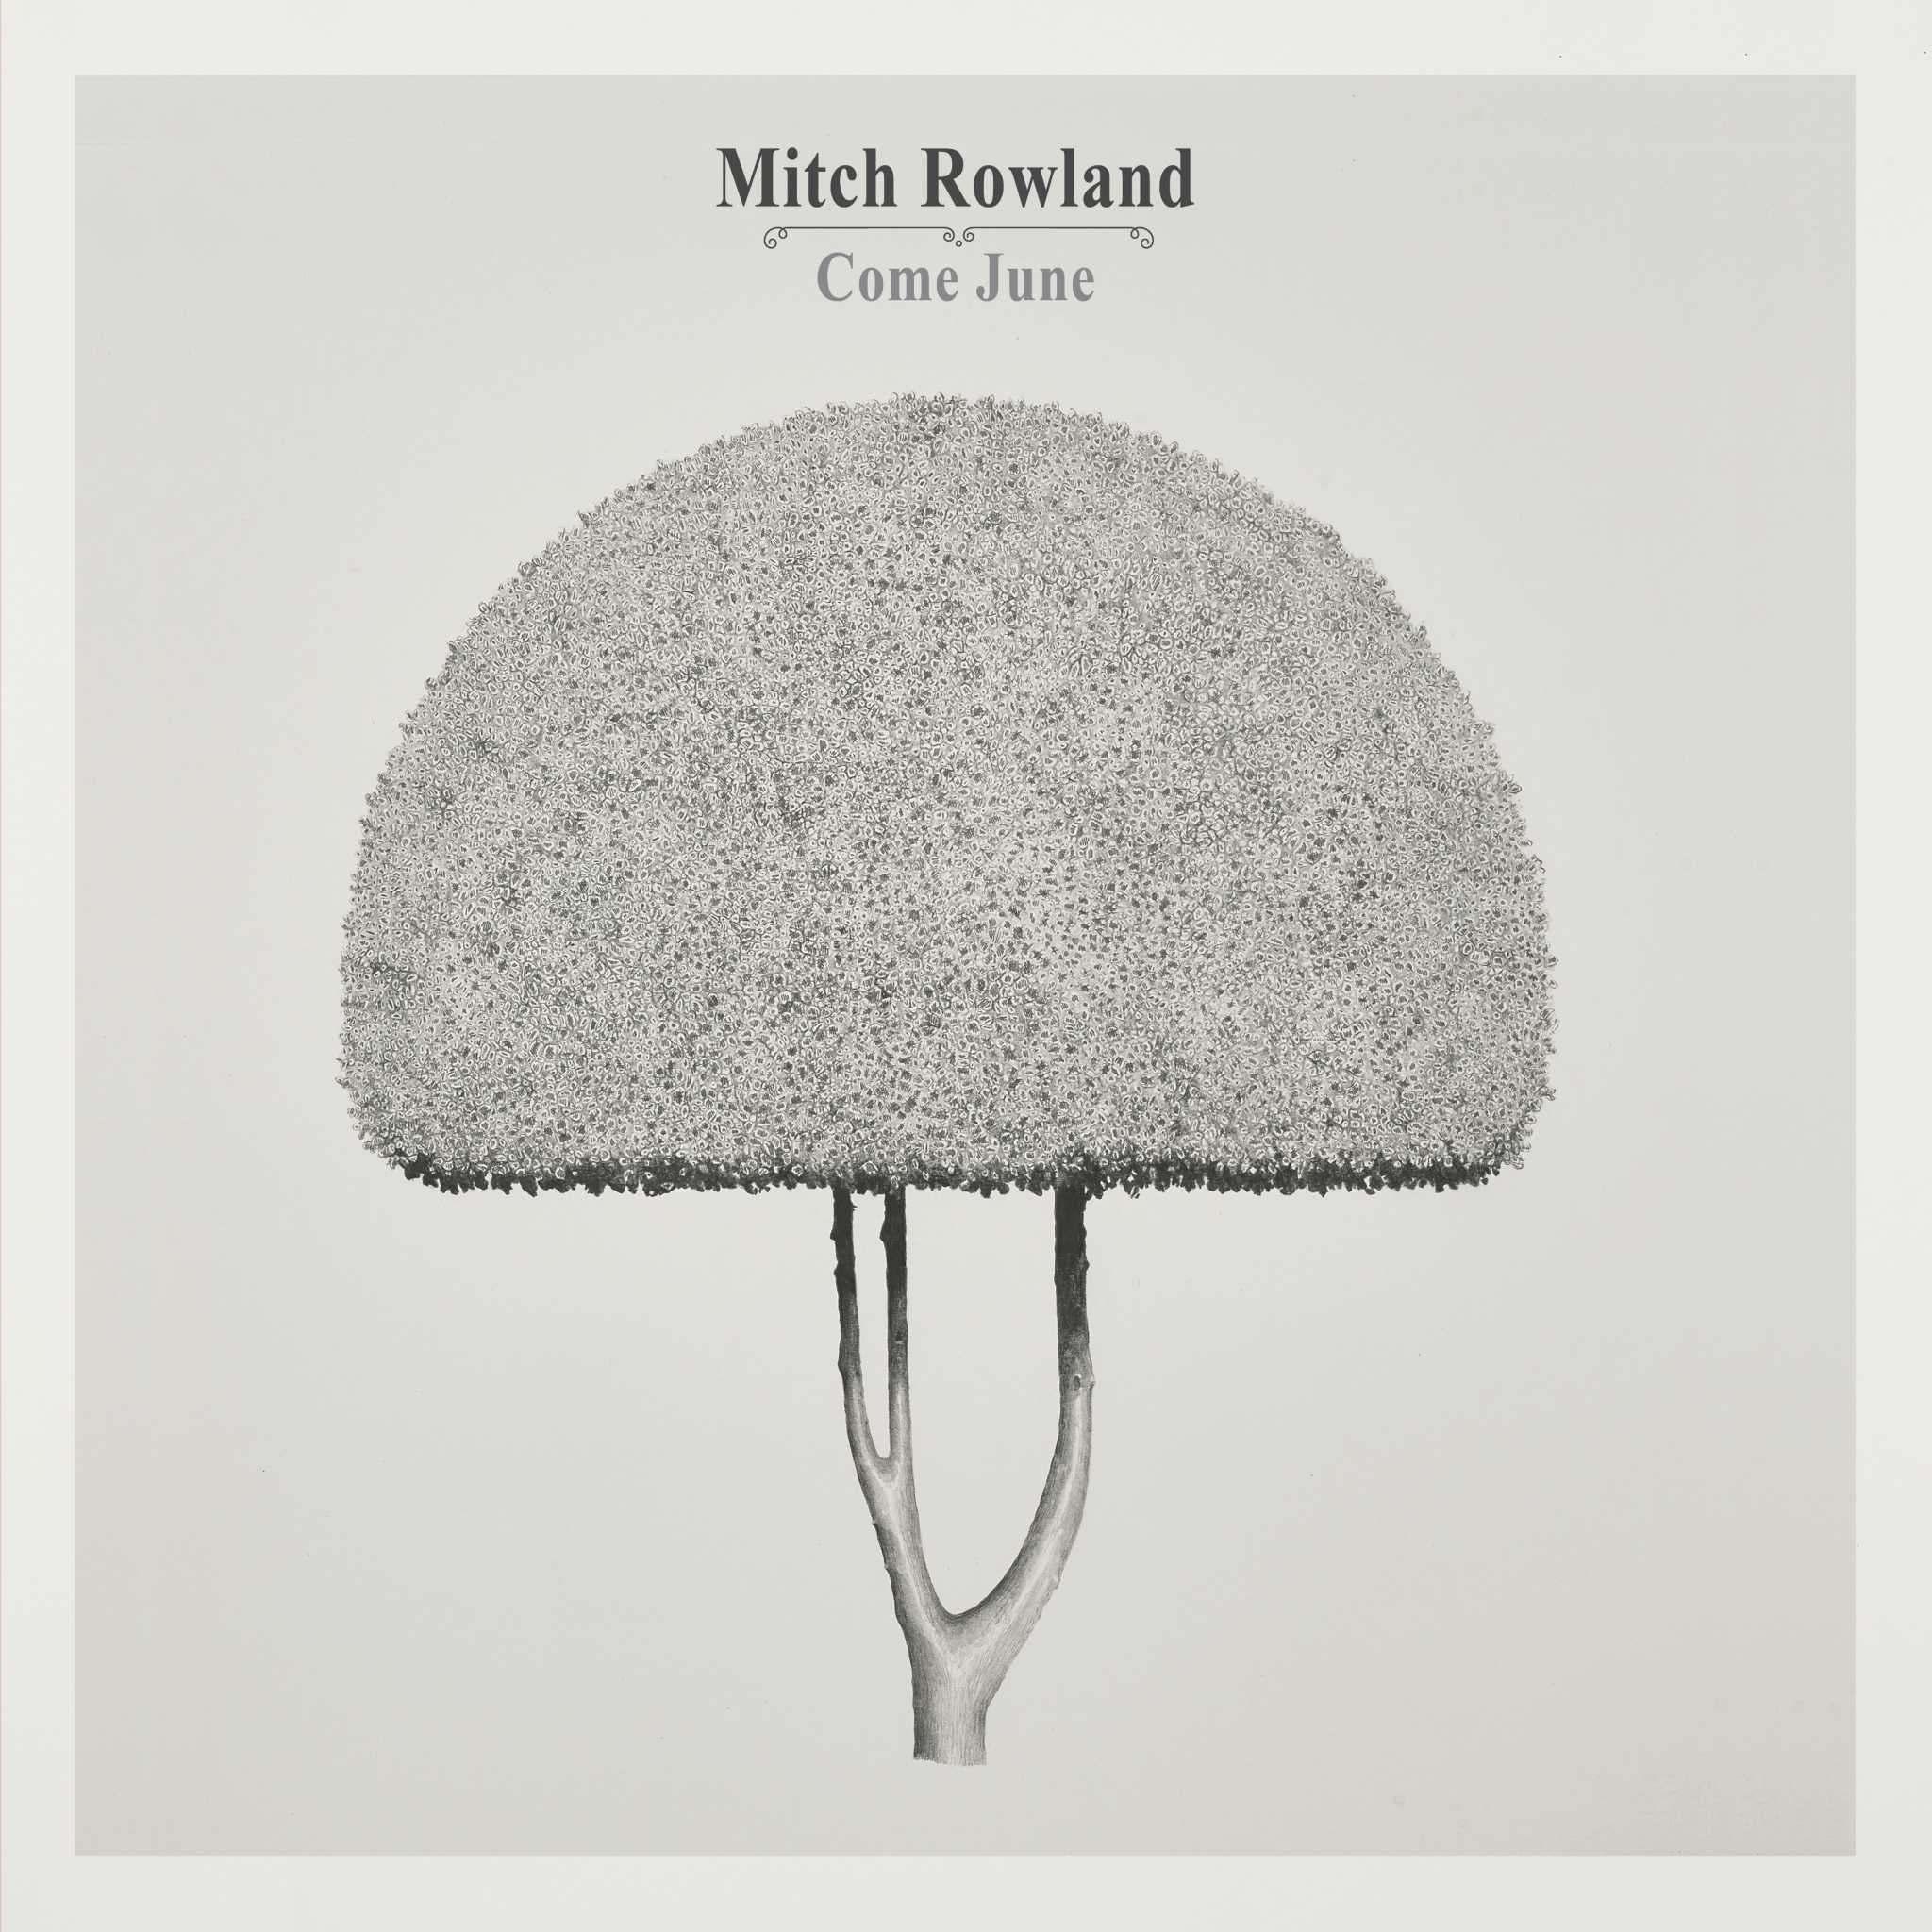 Music Review - Mitch Rowland